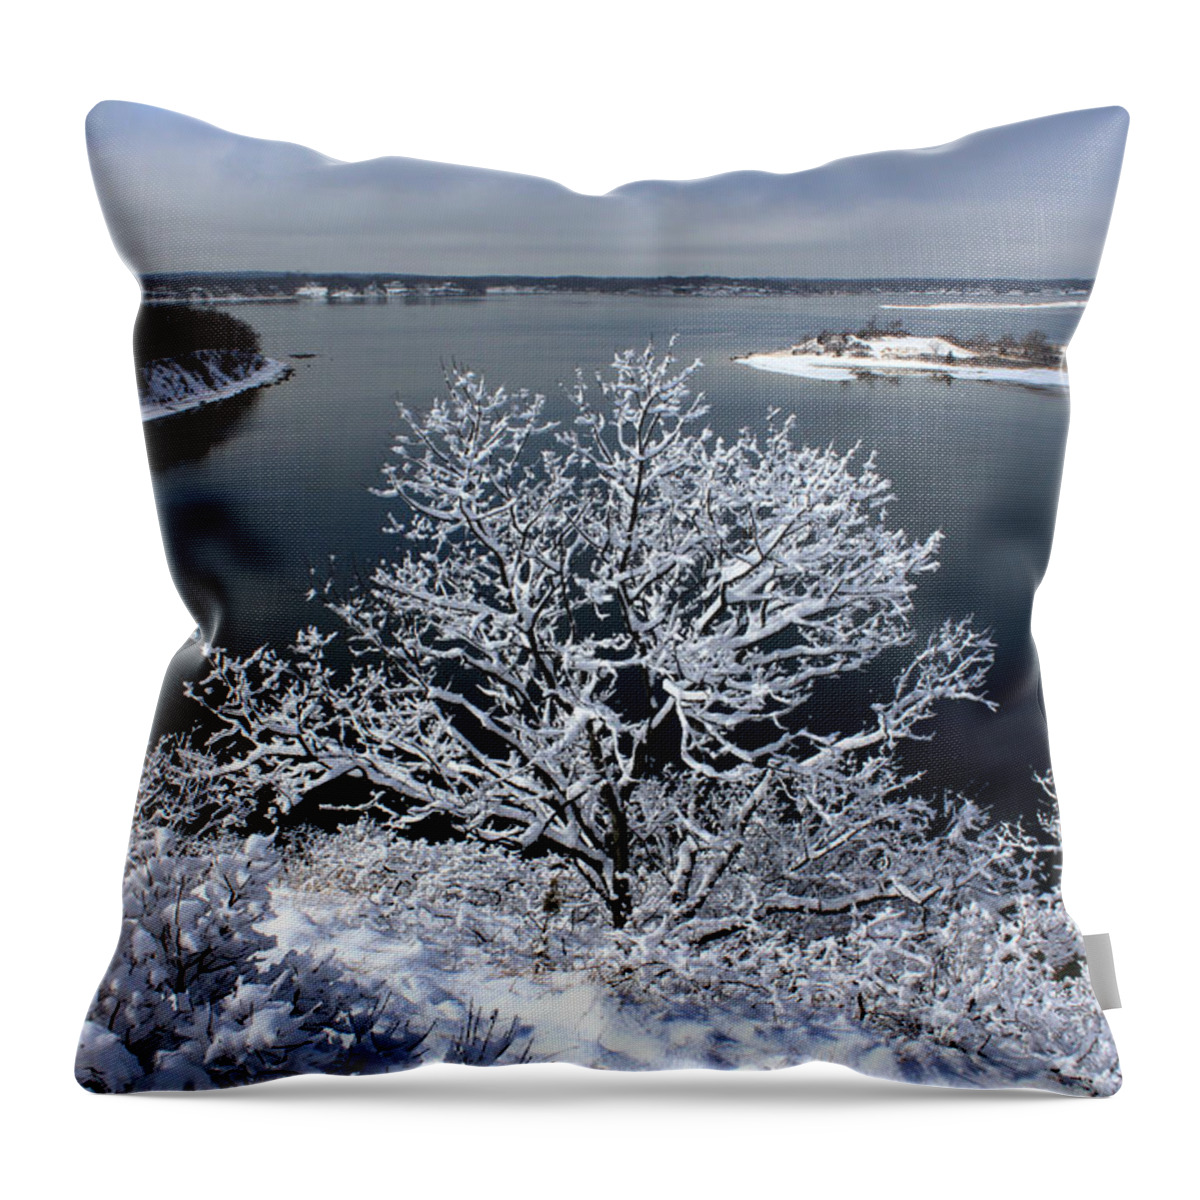 Snowy Tree Throw Pillow featuring the photograph Snow Tree Cove Port Jefferson New York by Bob Savage